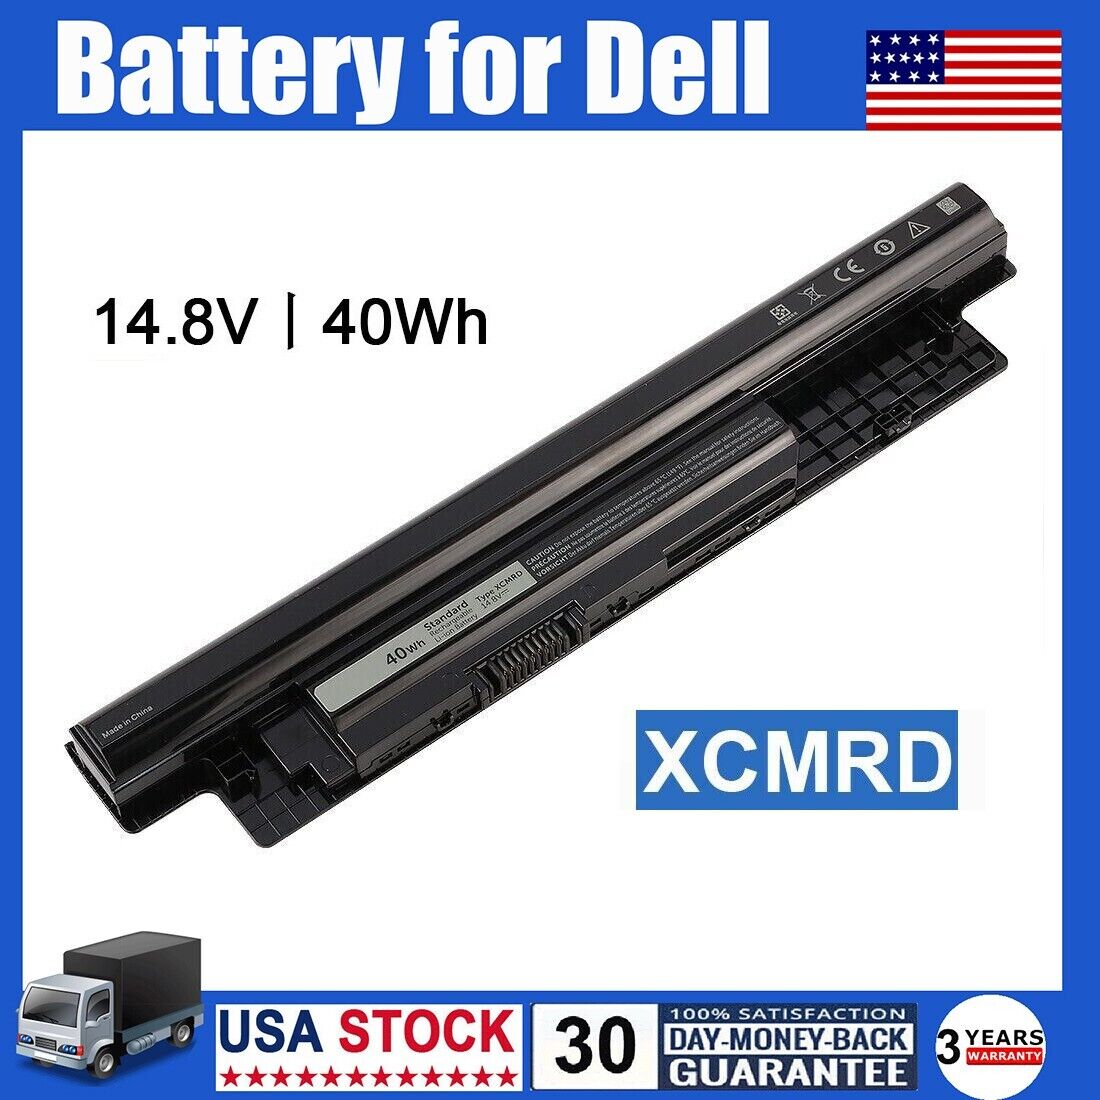 XCMRD Battery For Dell Inspiron 15 3000 Series 3531 3537 3541 3542 3543 40Wh US